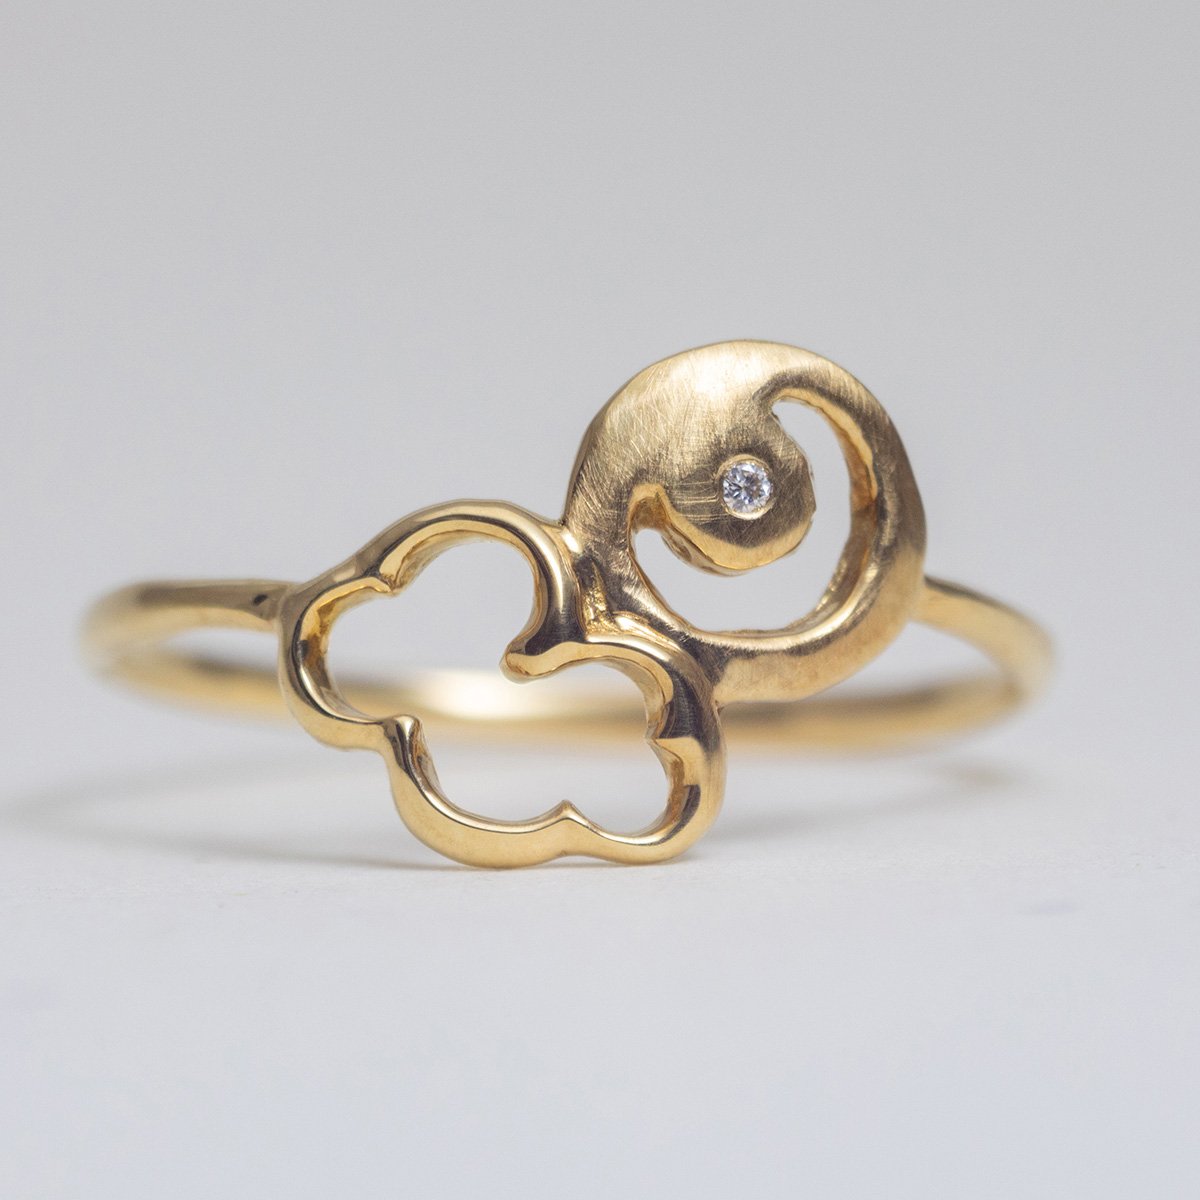 Gold Ring with Crescent Moon Peeking Through Clouds (18k)